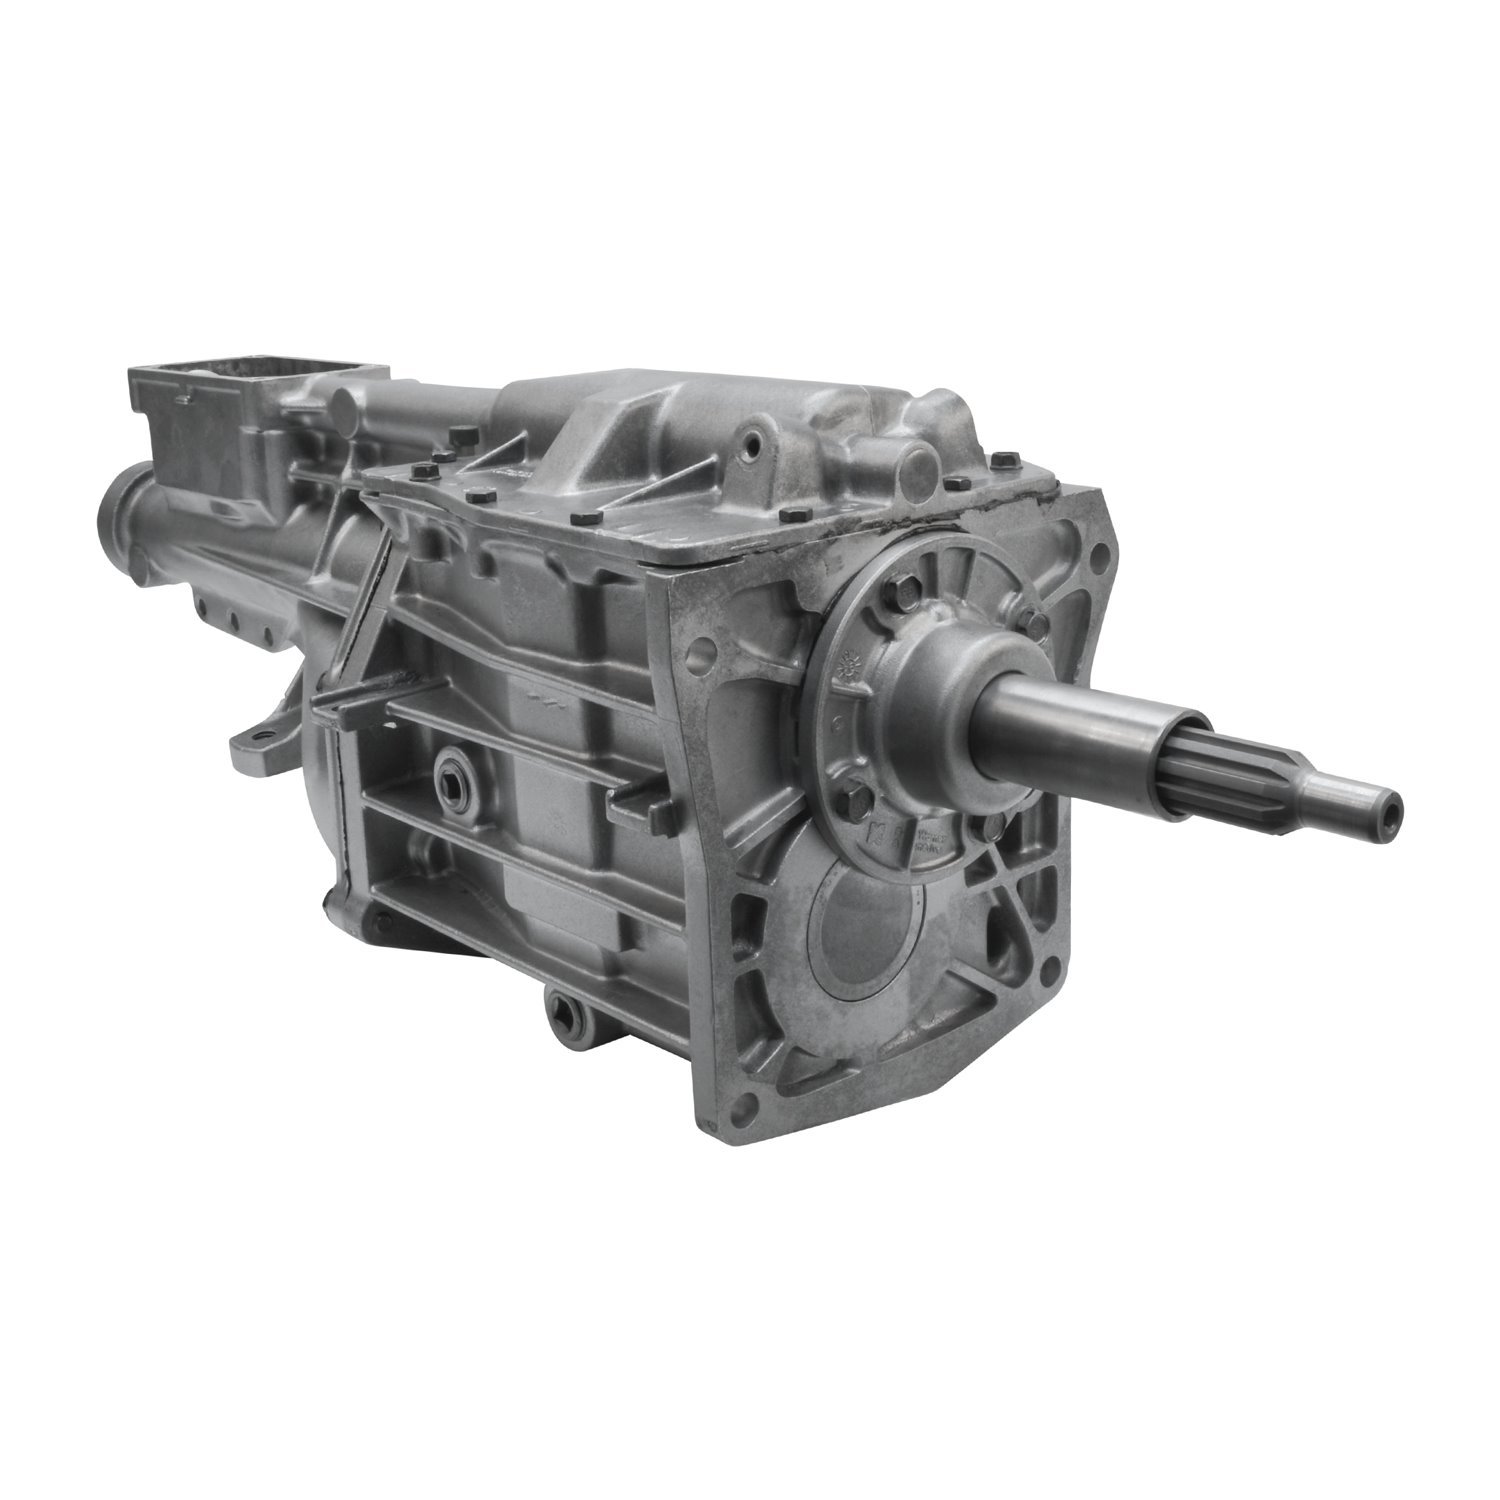 Remanufactured T5 Manual Transmission for Ford 87-93 Mustang, 5 Speed